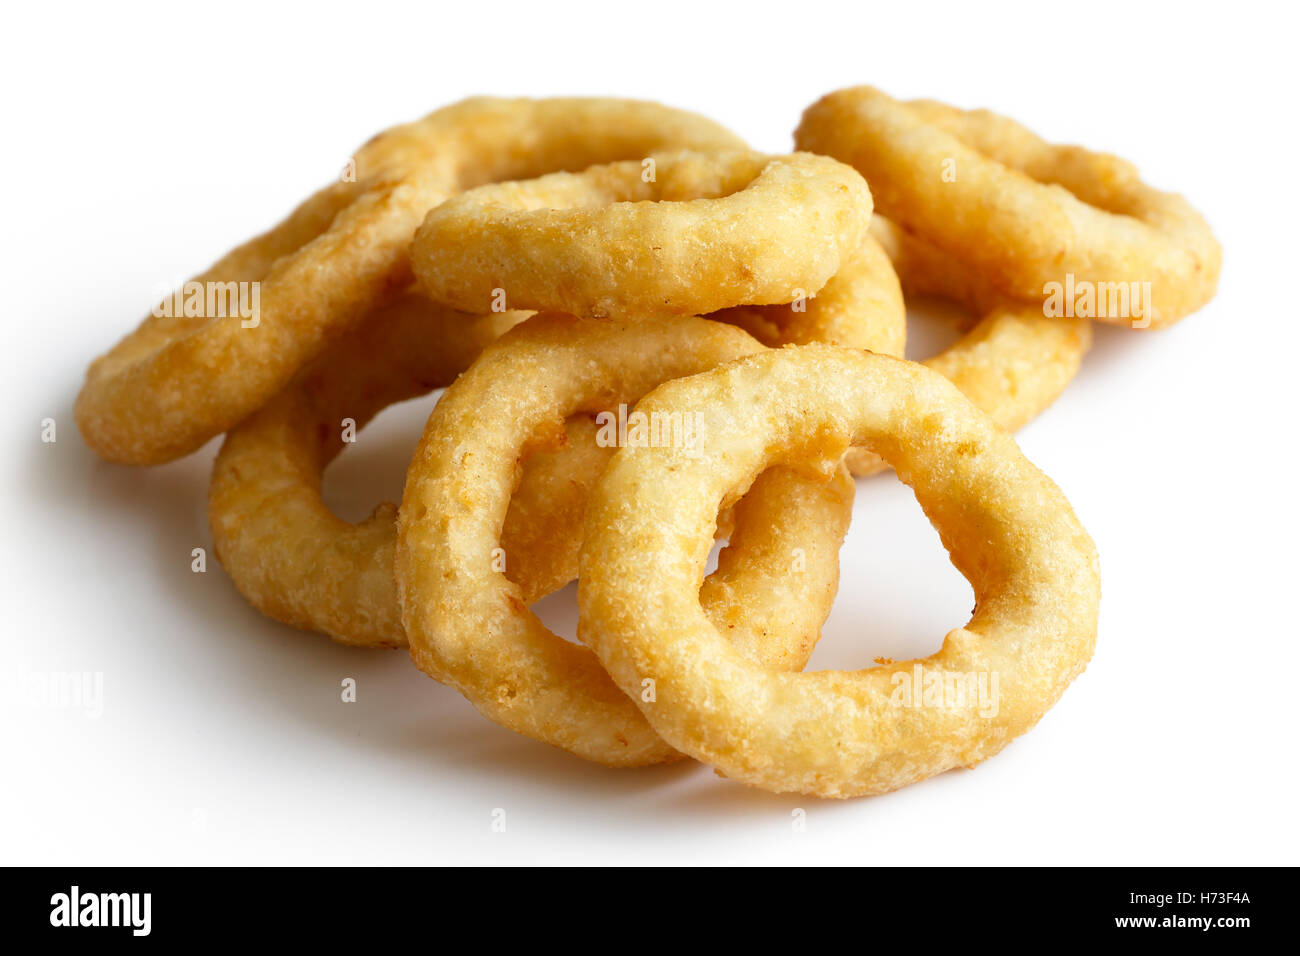 Heap of deep fried onion or calamari rings isolated on white. Stock Photo